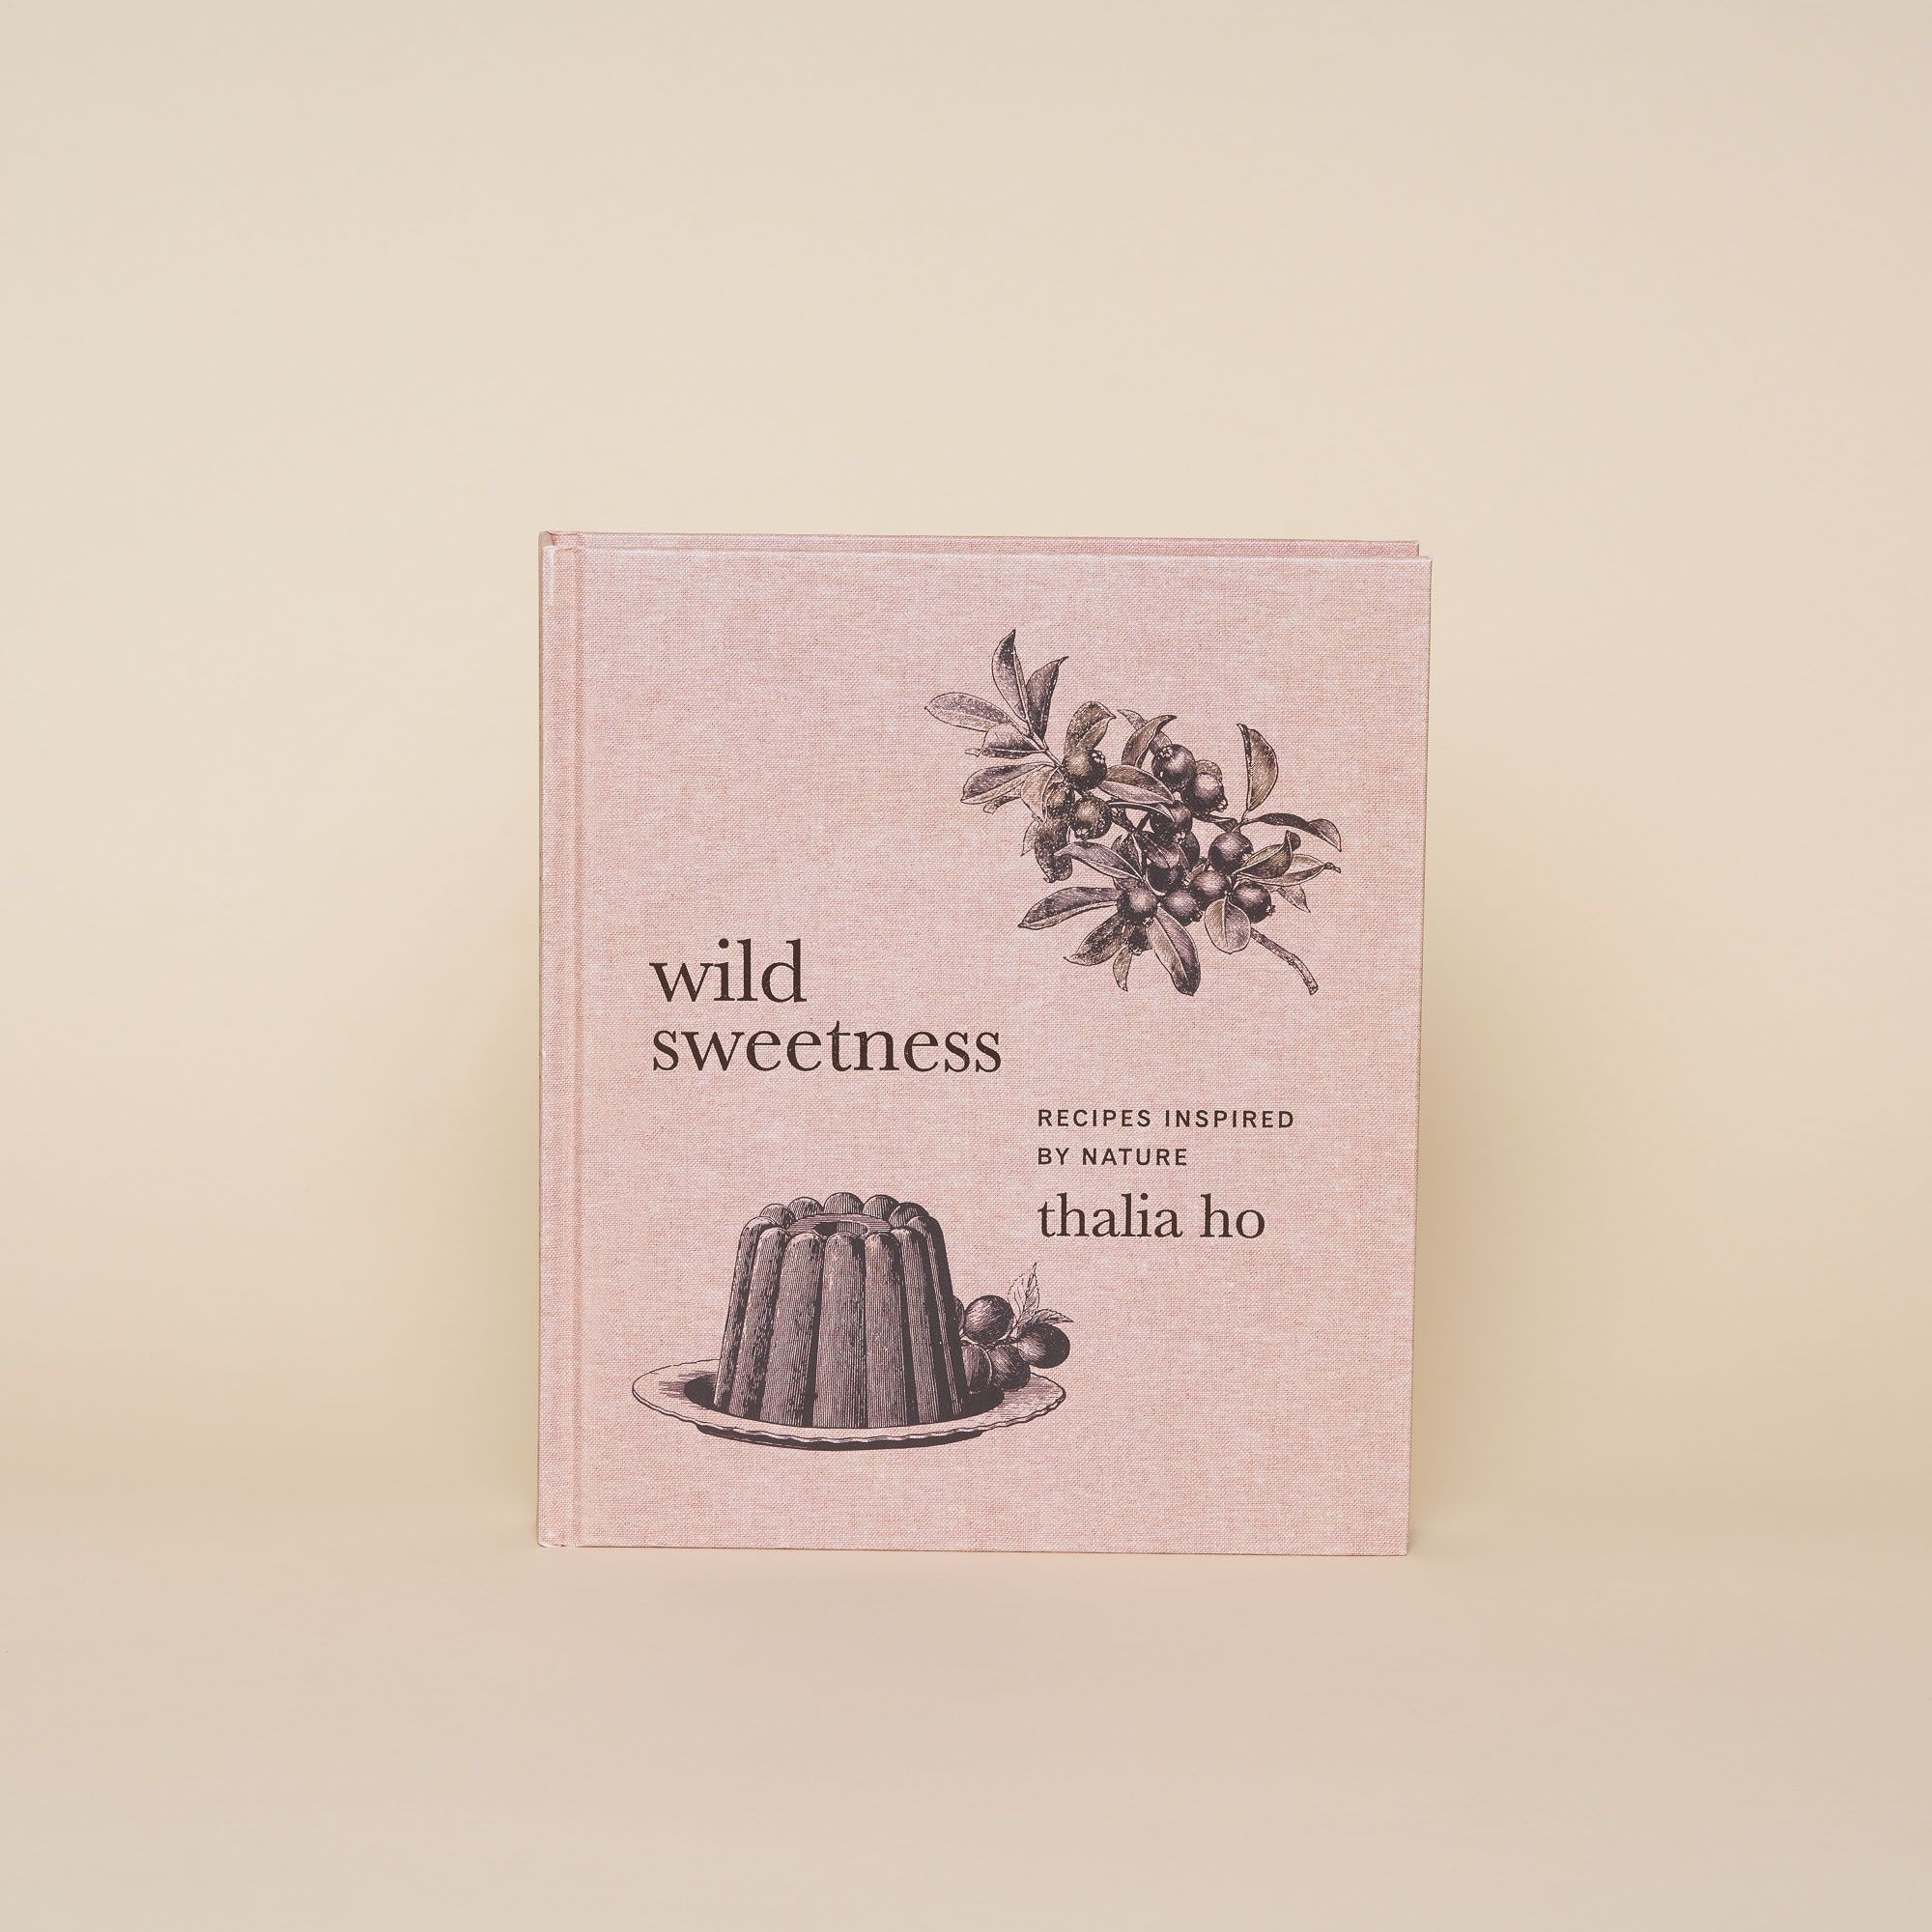 A hardcover cookbook with a pastel pink cover with an illustration of a bunt cake with other floral elements